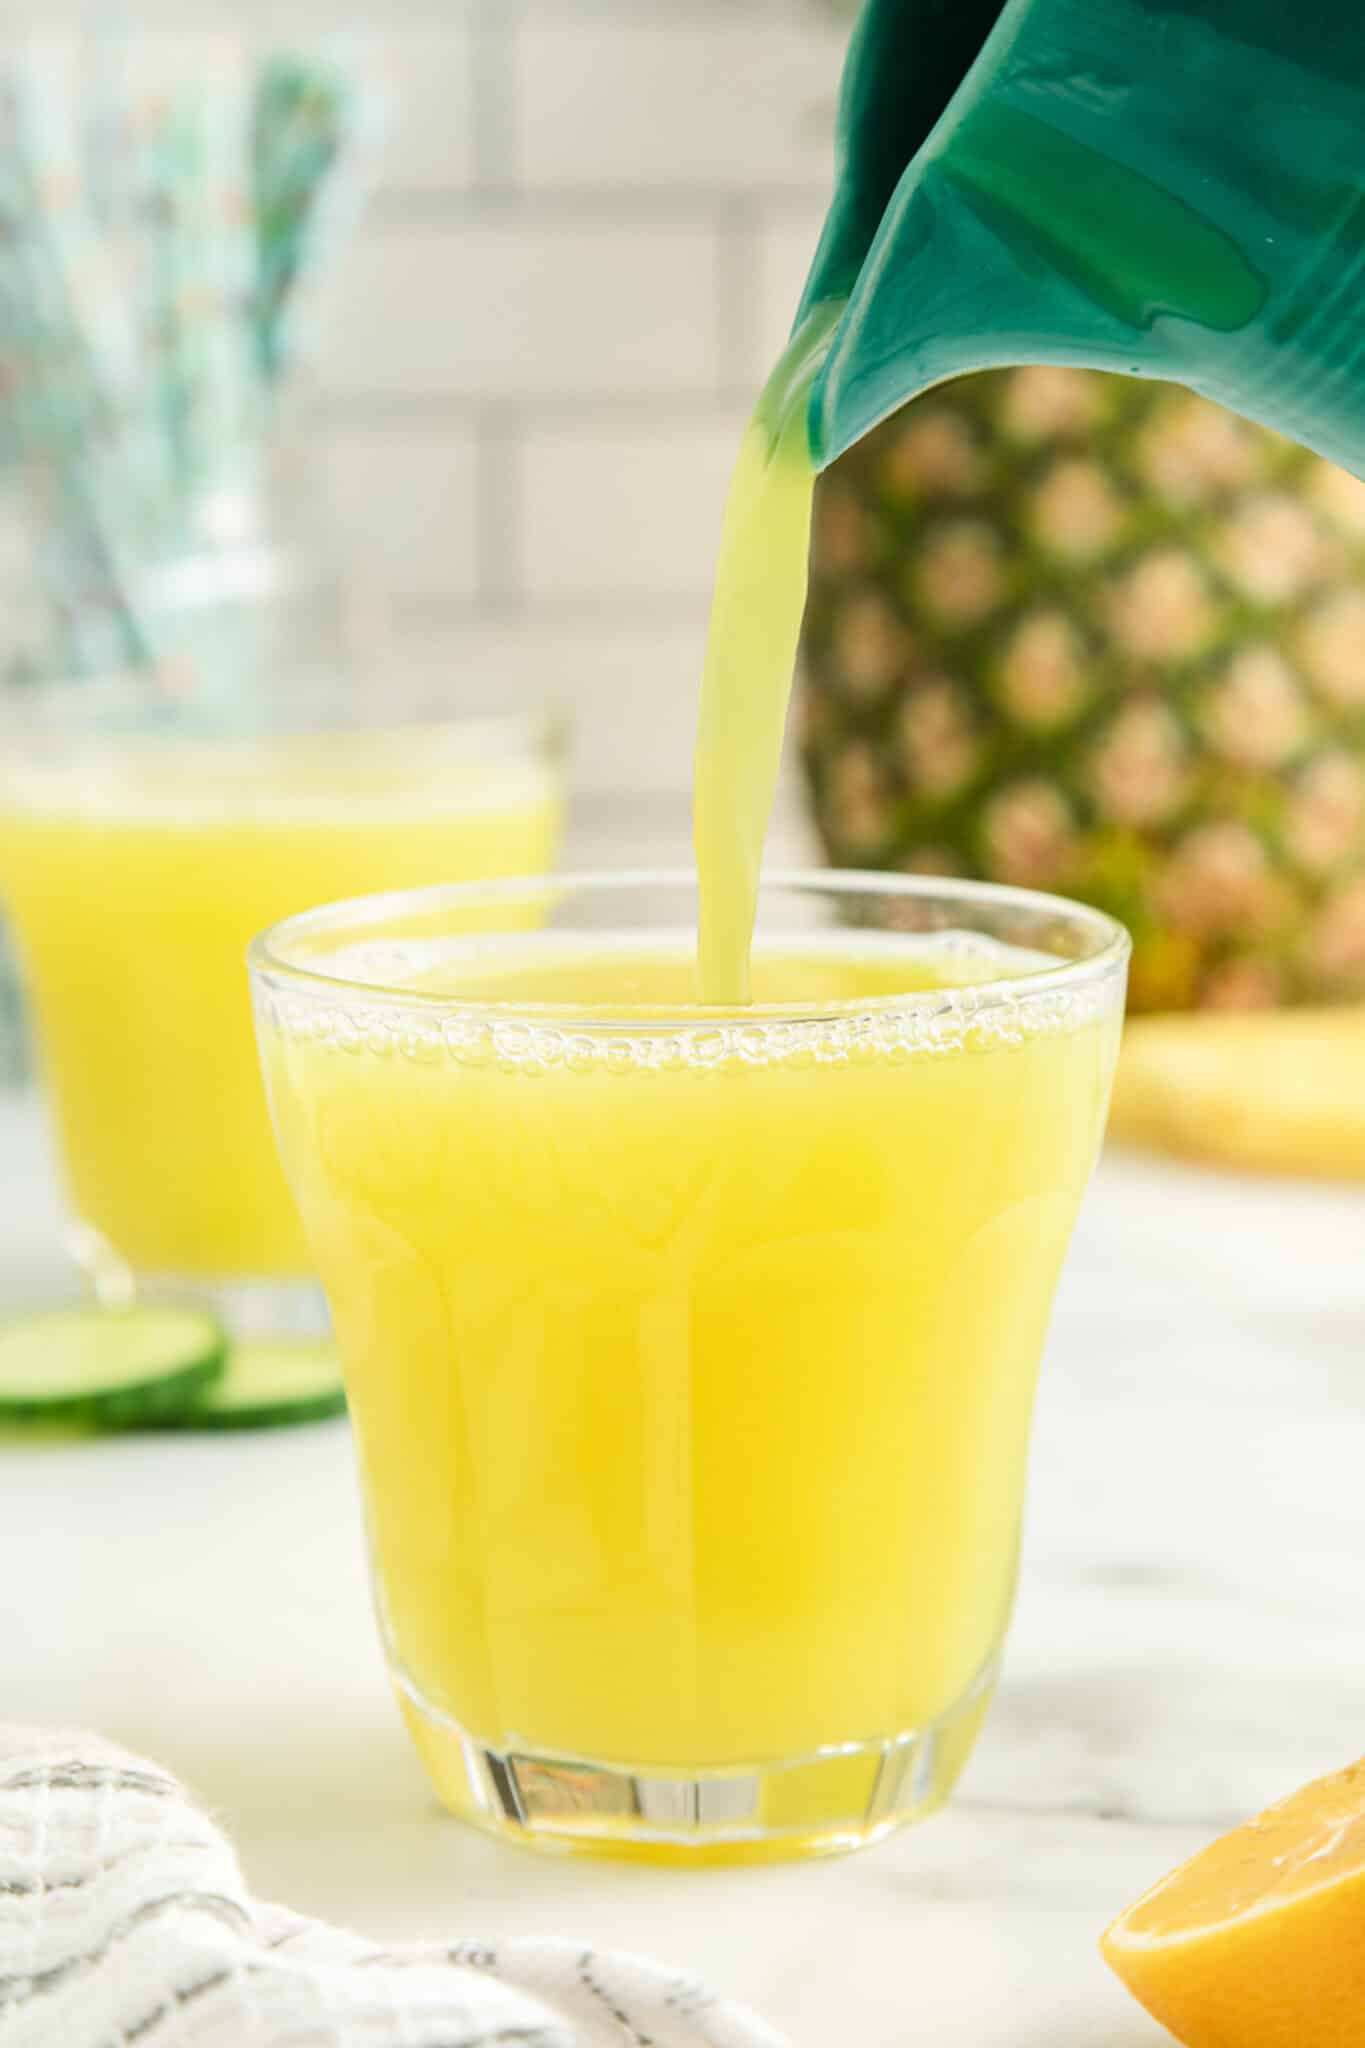 pouring pineapple cucumber juice into a glass.